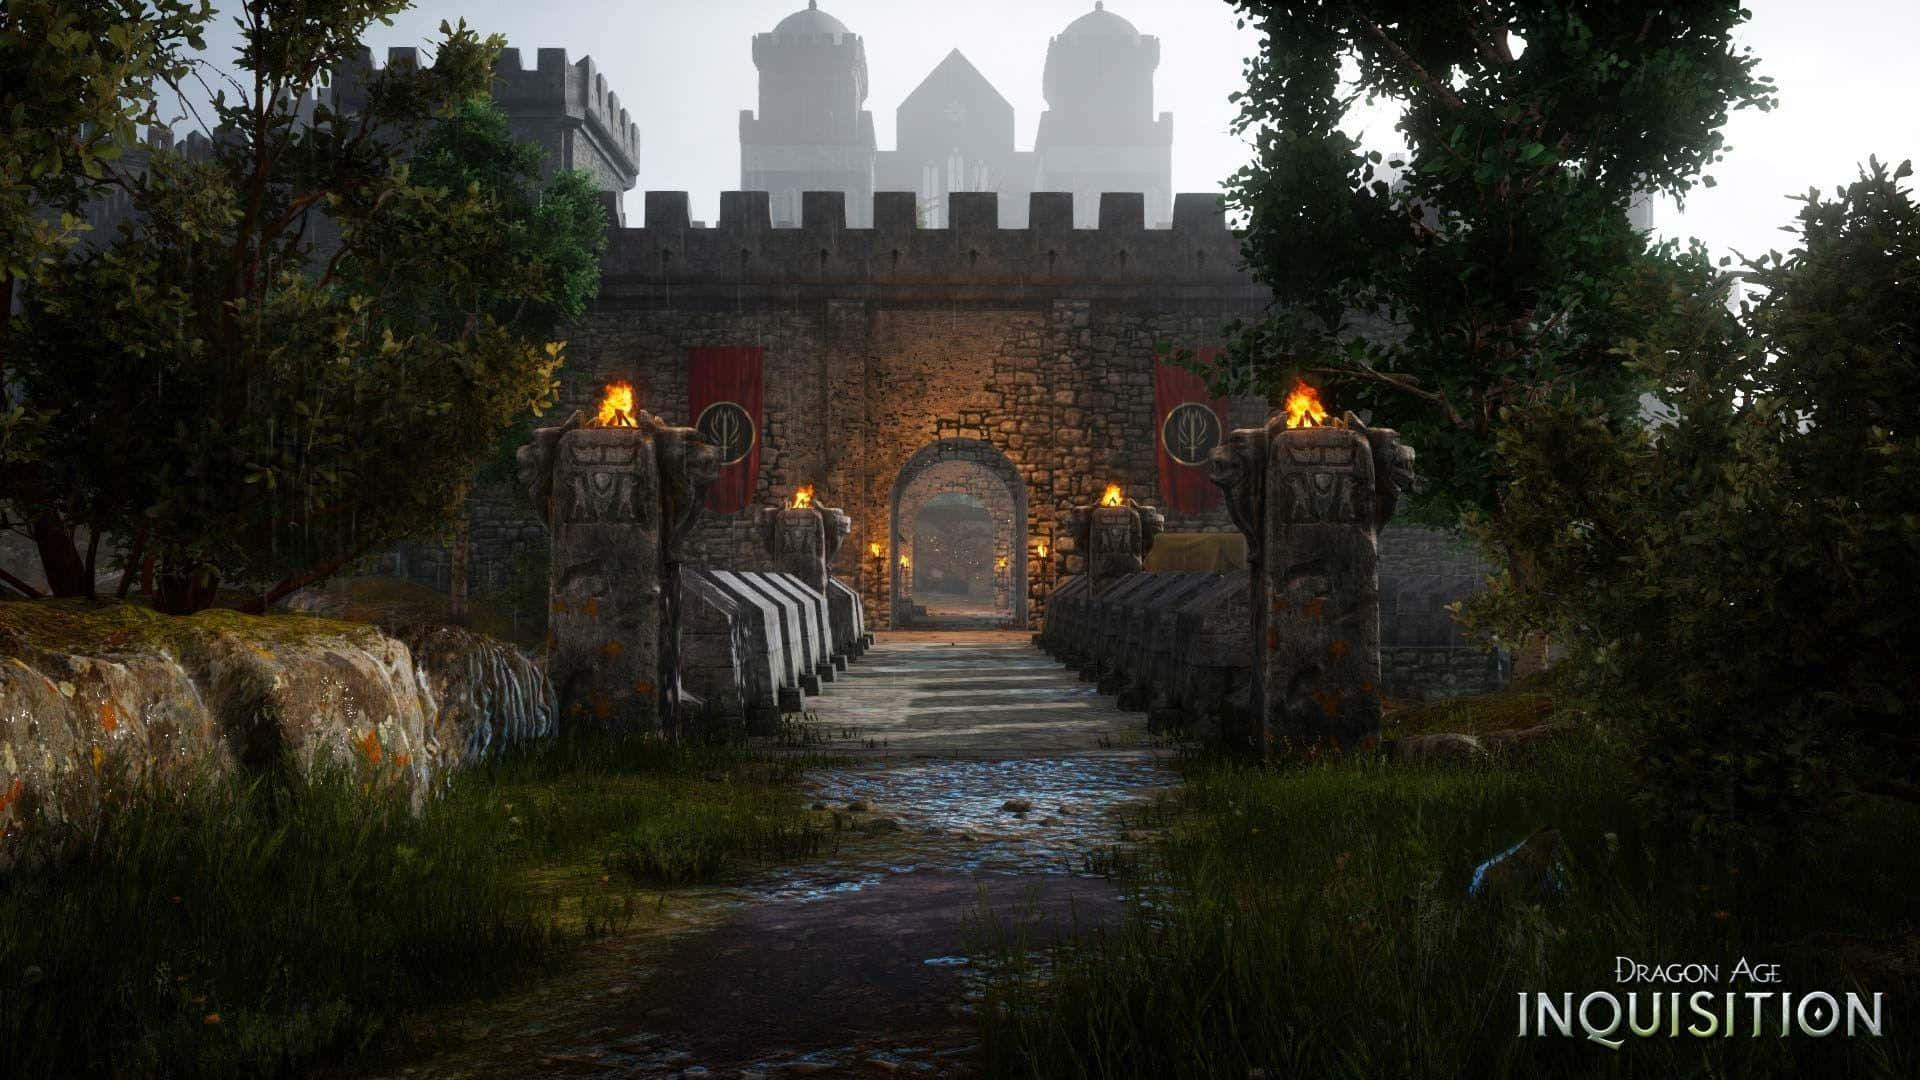 Play the award-winning role-playing game, "Dragon Age Inquisition"